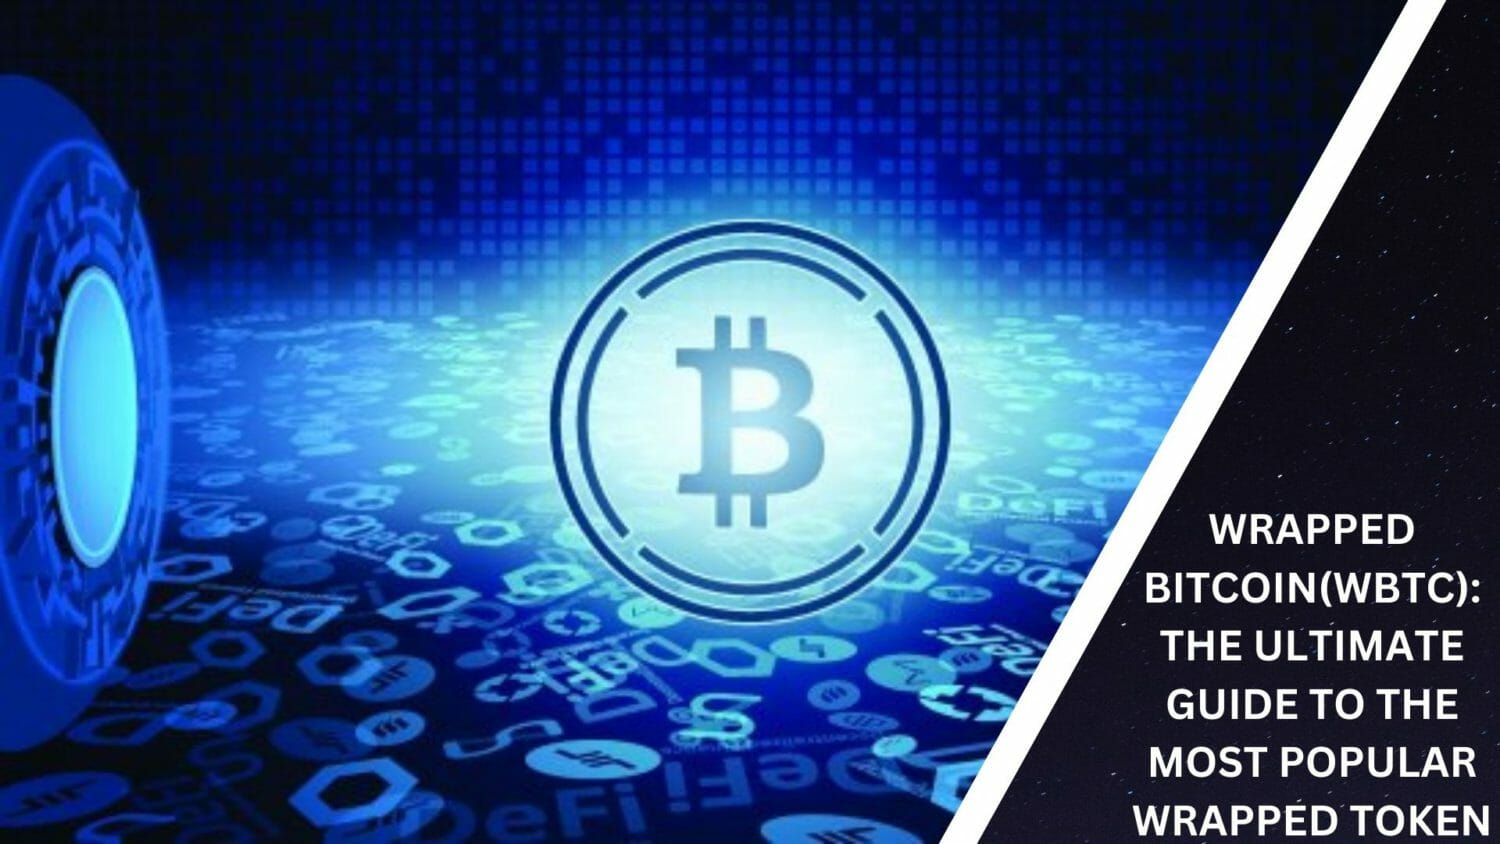 Wrapped Bitcoin(Wbtc): The Ultimate Guide To The Most Popular Wrapped Token